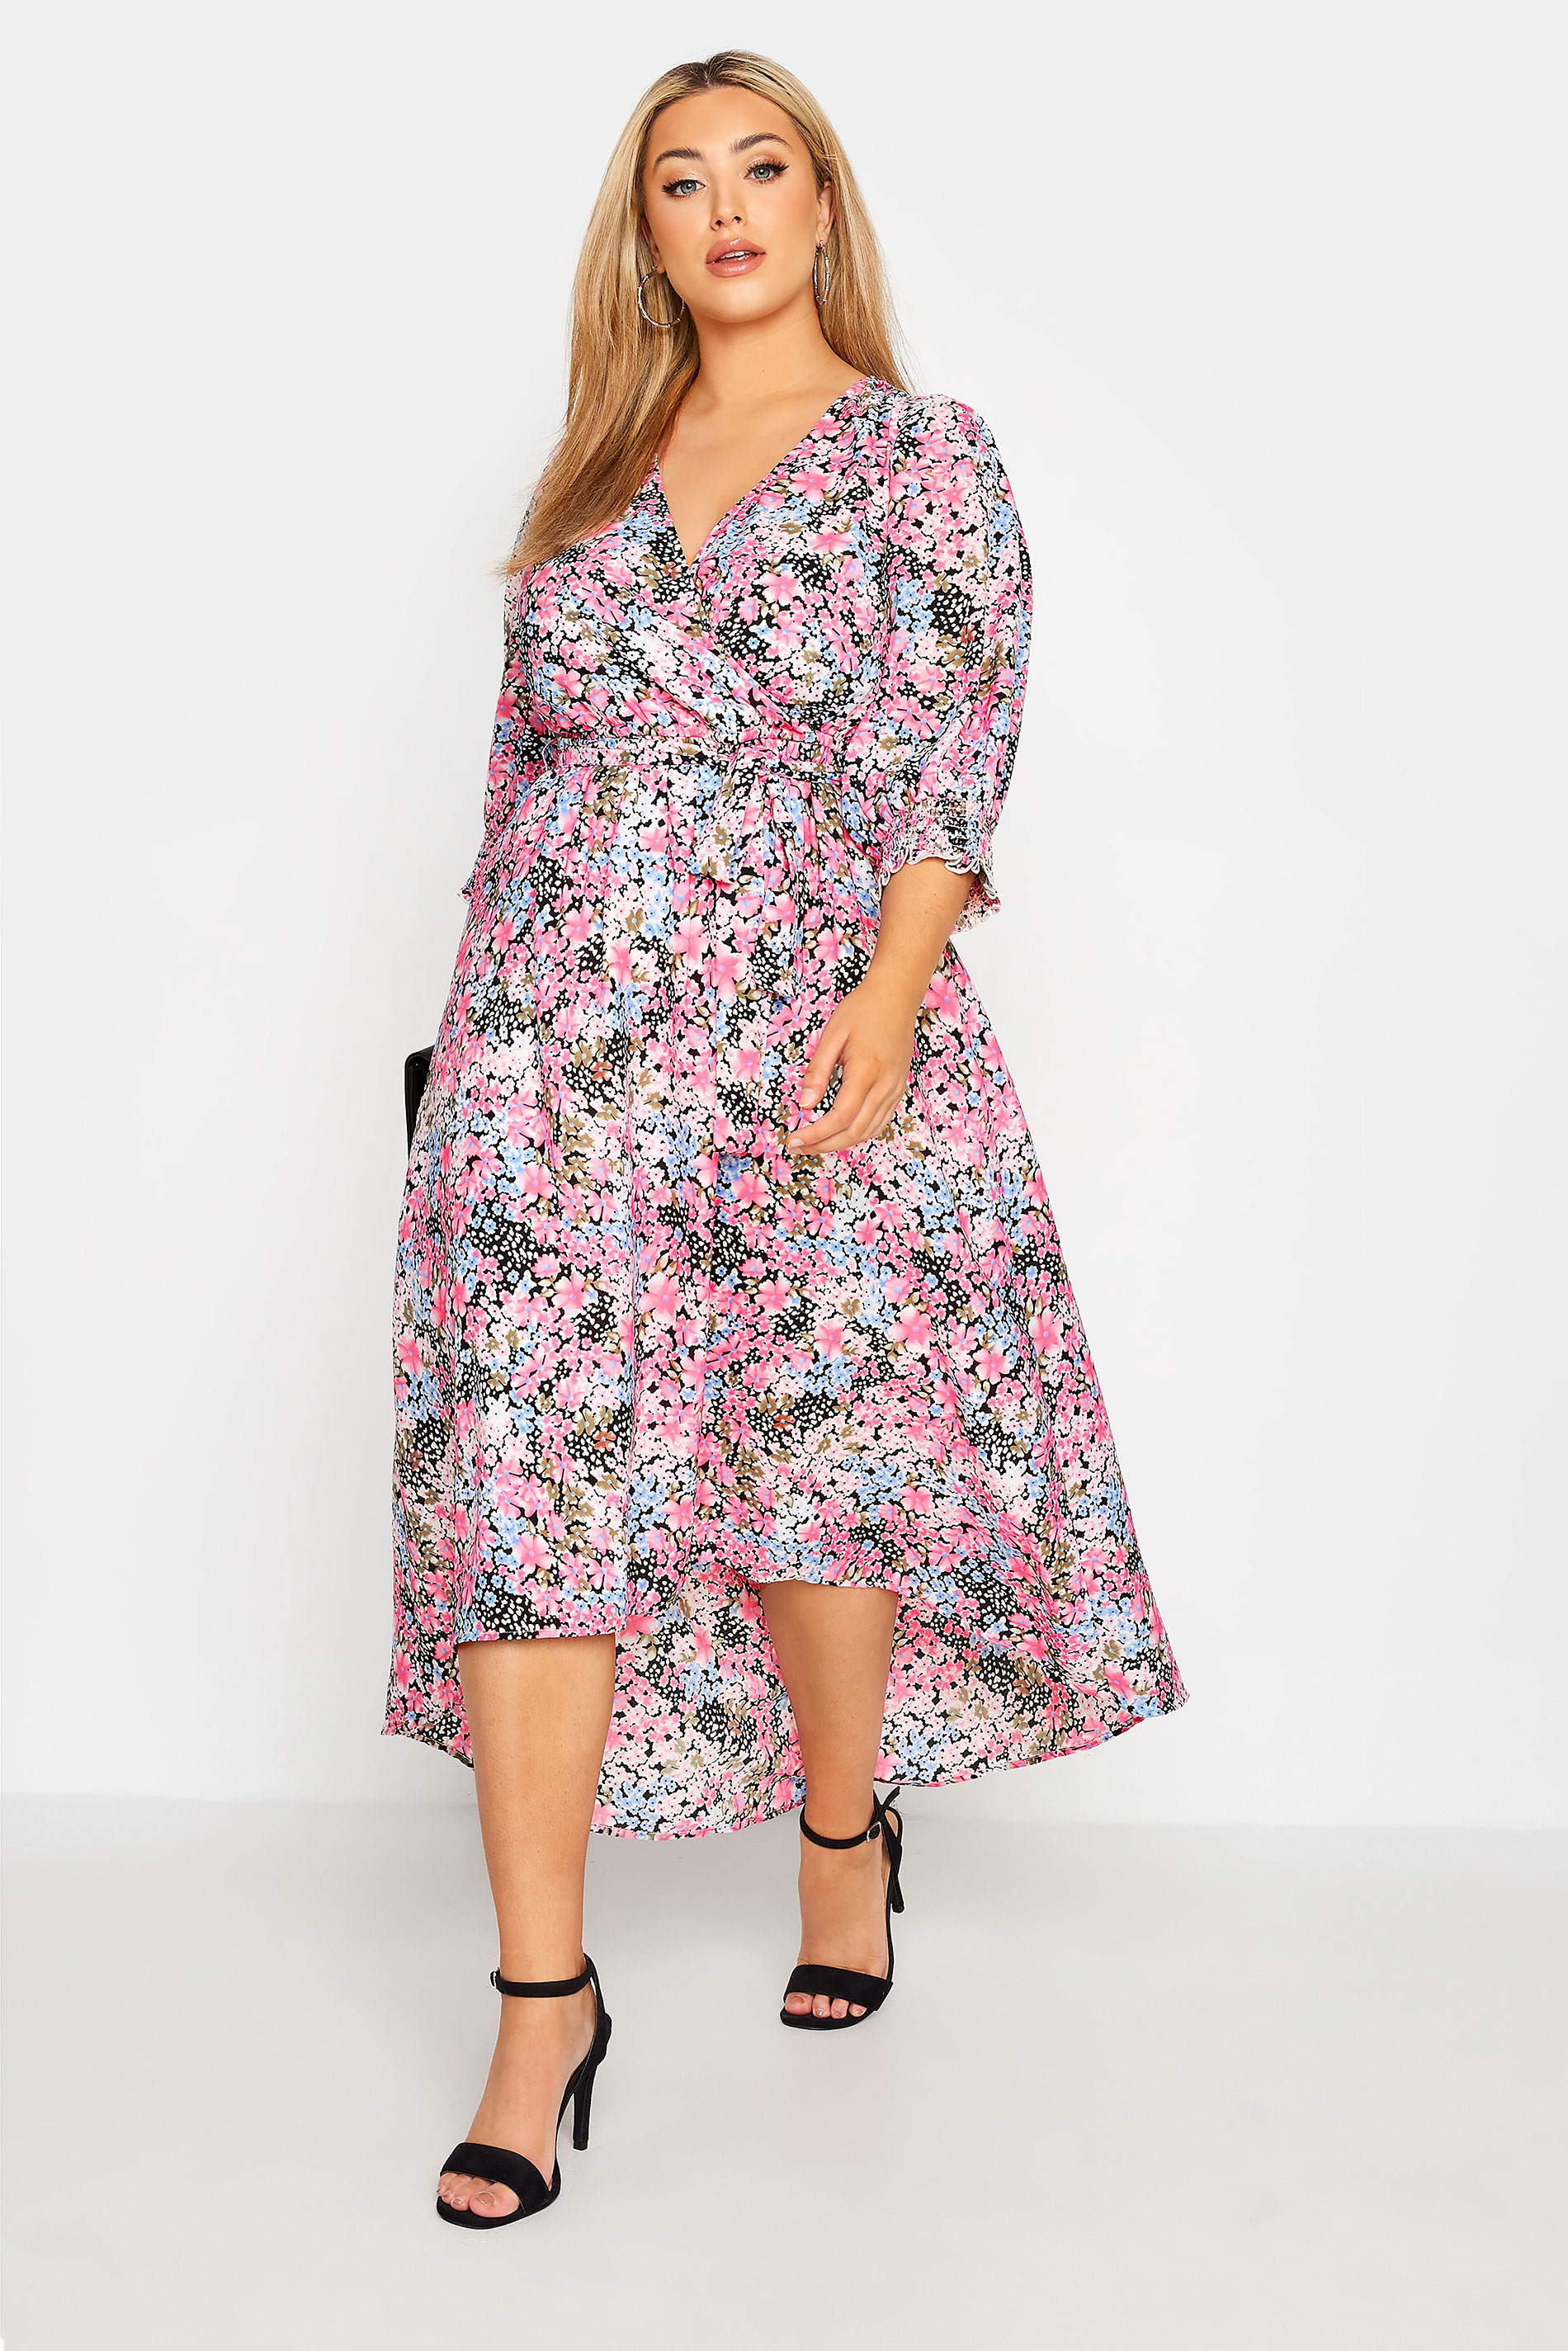 Robes Grande Taille Grande taille  Robes Portefeuilles | YOURS LONDON - Robe Rose Clair Floral Ourlet Plongeant - UC70496